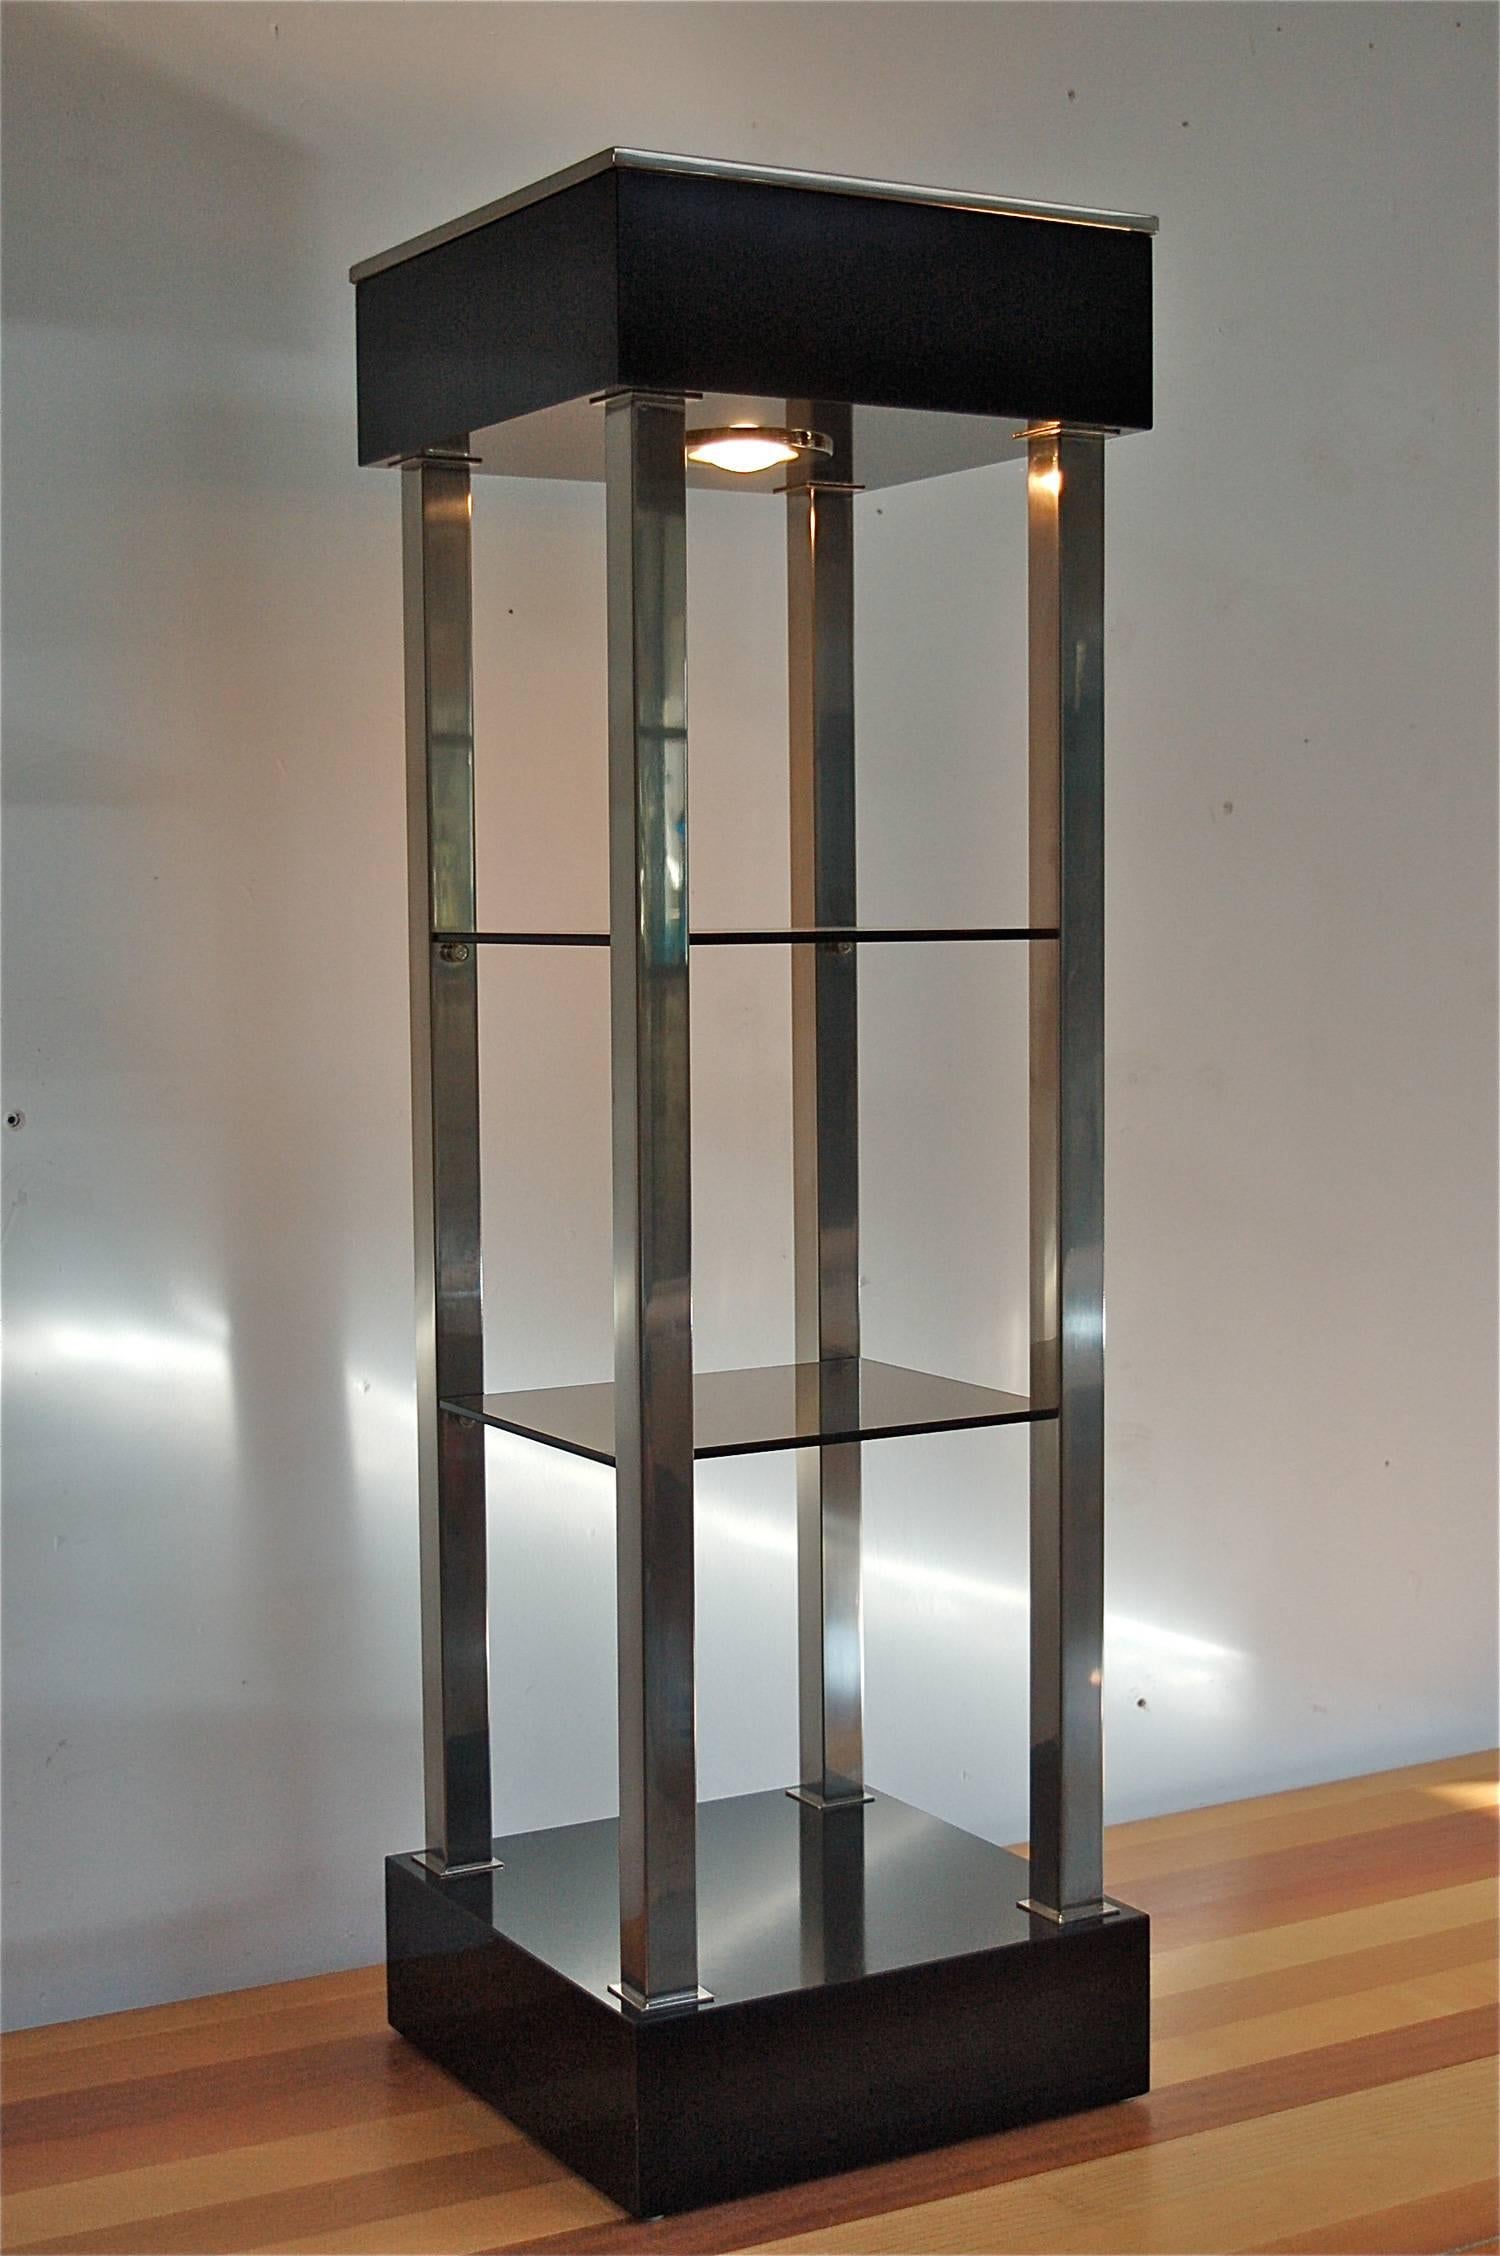 1970s retro shop or tower display case with top lighting by quality Belgian manufacturer Belgo Chrome. The square base and top are made of black lacquered wood. The top has a built in light fixture, a down lighter. It has four polished metal pillars